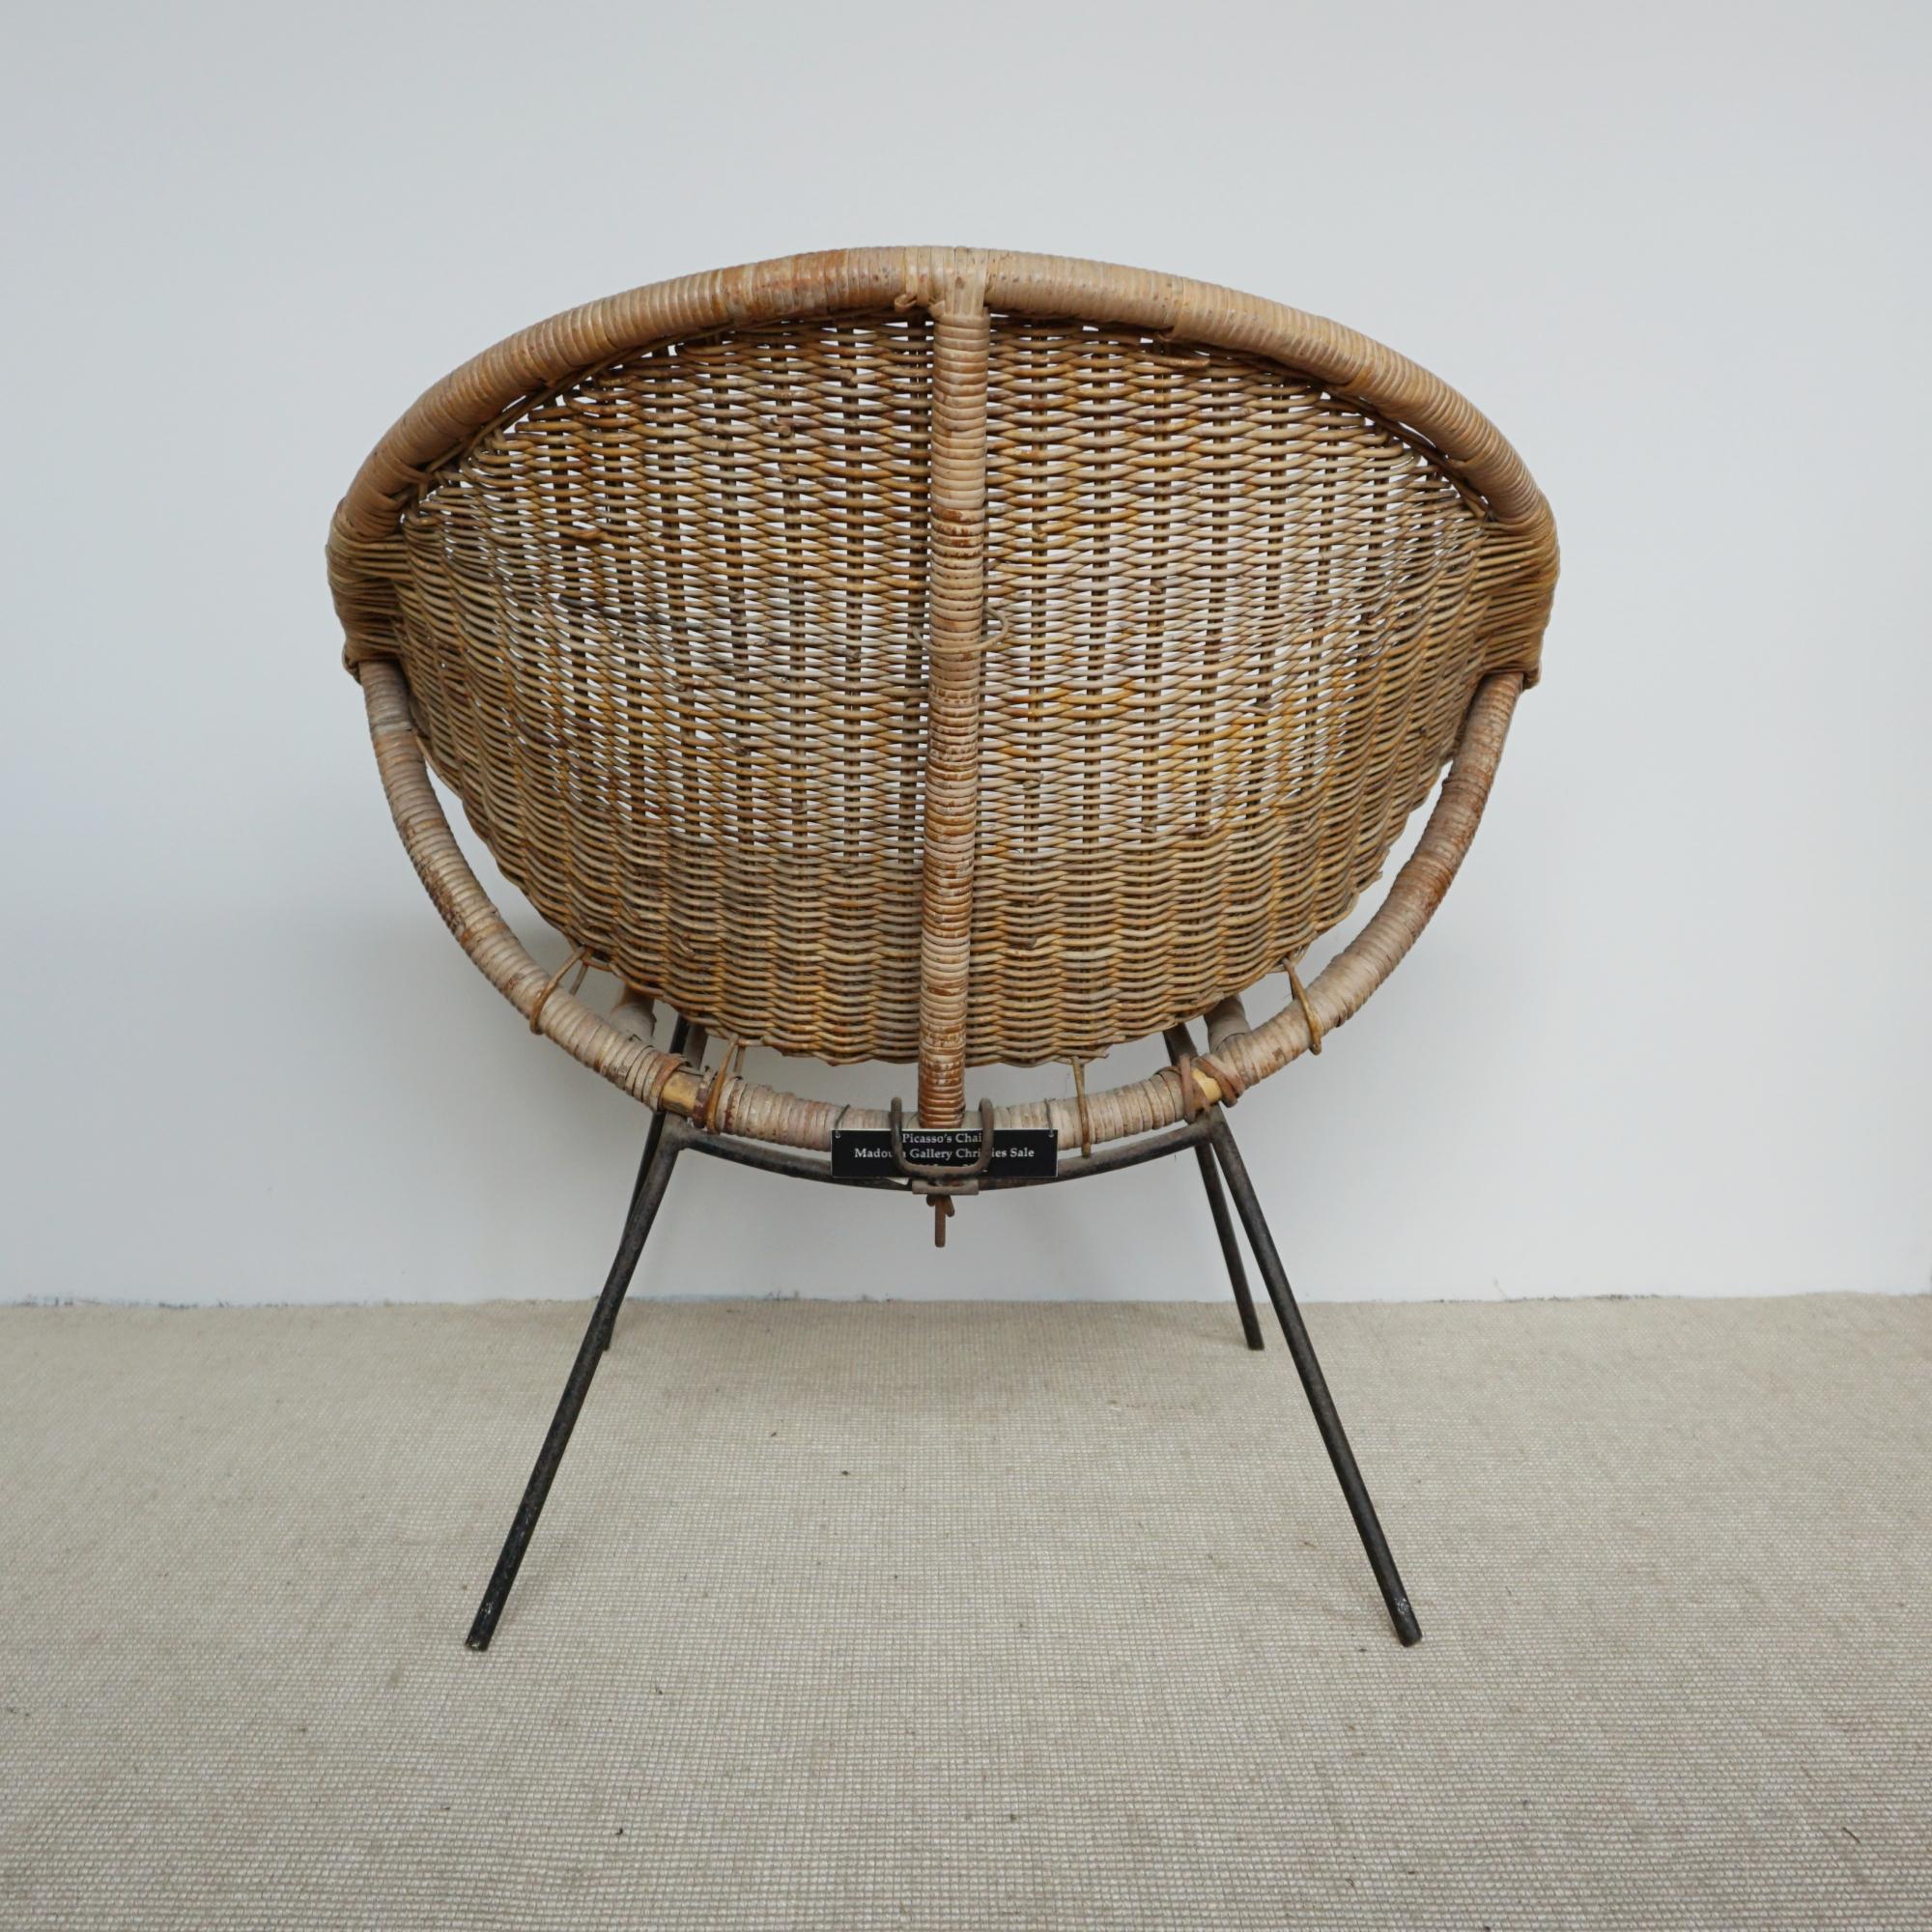 Picasso's Wicker and Steel Chair from the Madoura Collection Circa 1960 For Sale 1